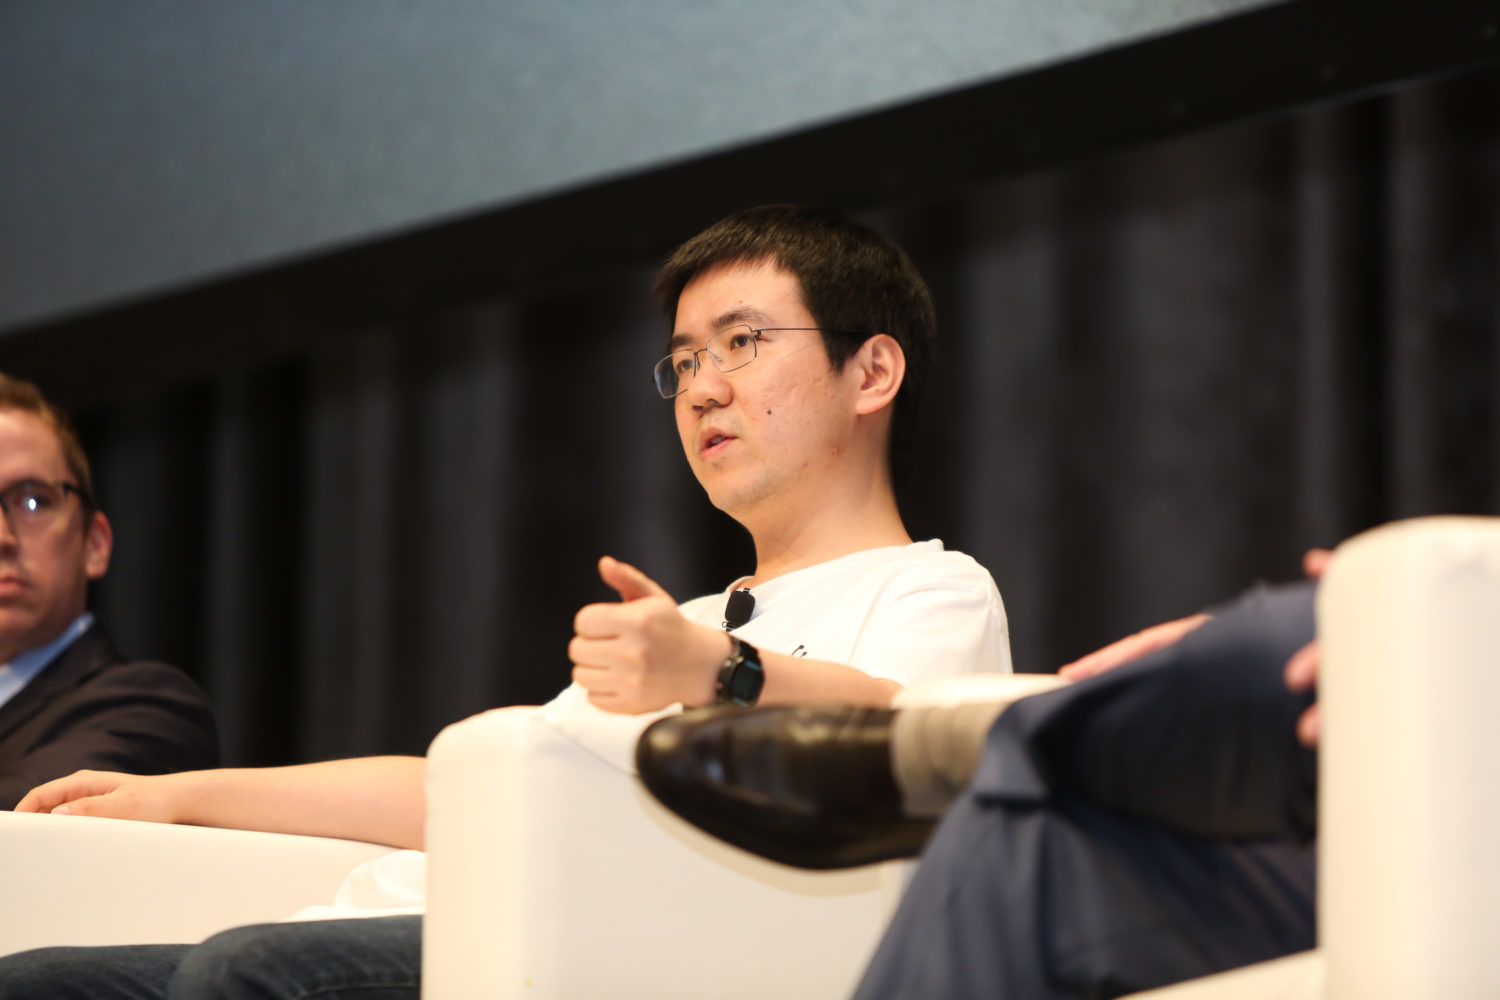 Bitmain Turmoil: Co-Founder And Executive Director Micree Zhan Ousted